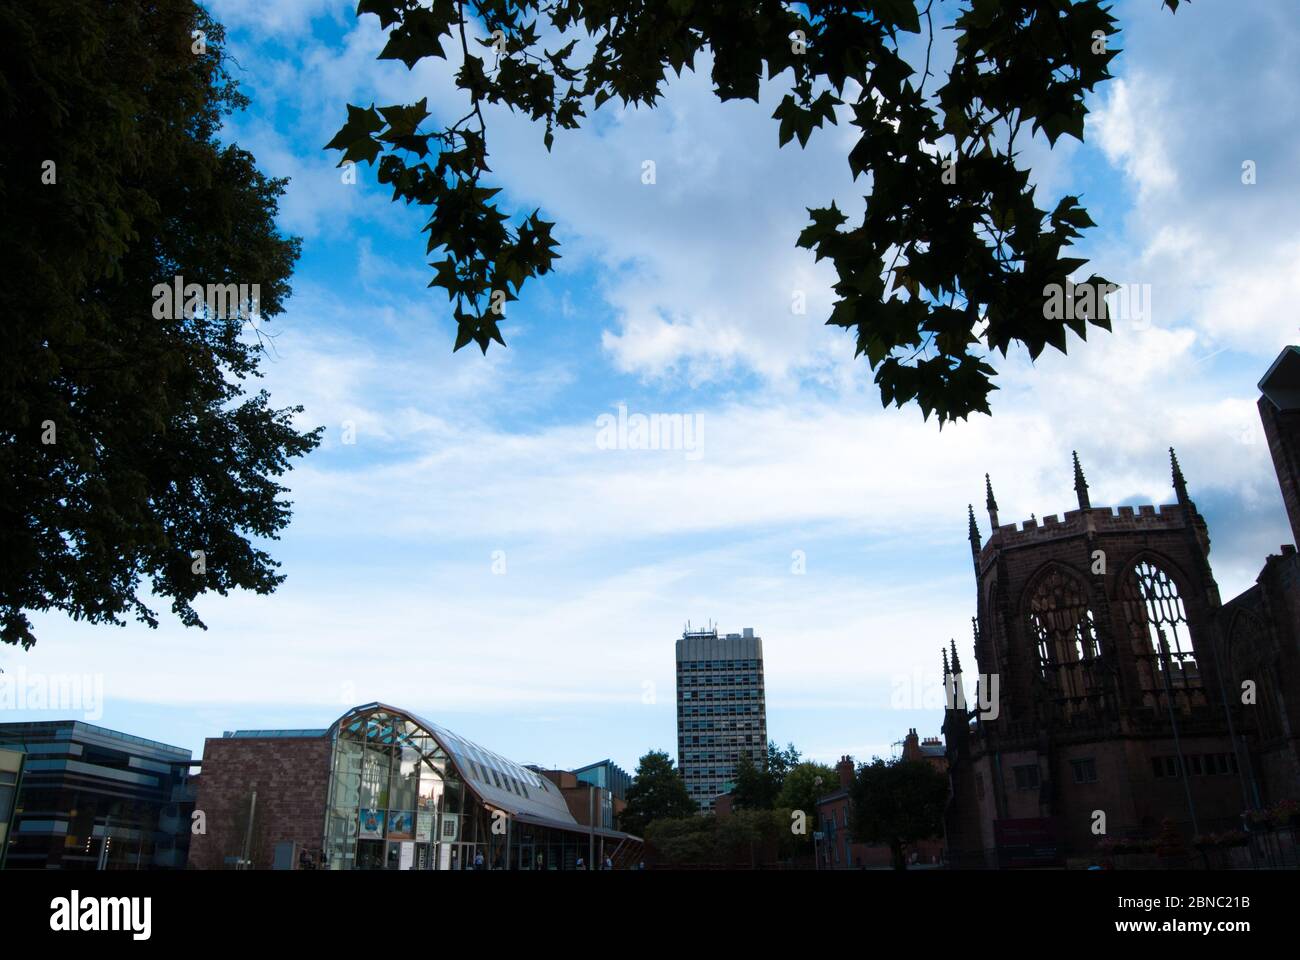 Coventry Cathedral surrounded by buildings and trees under a cloudy sky in England Stock Photo